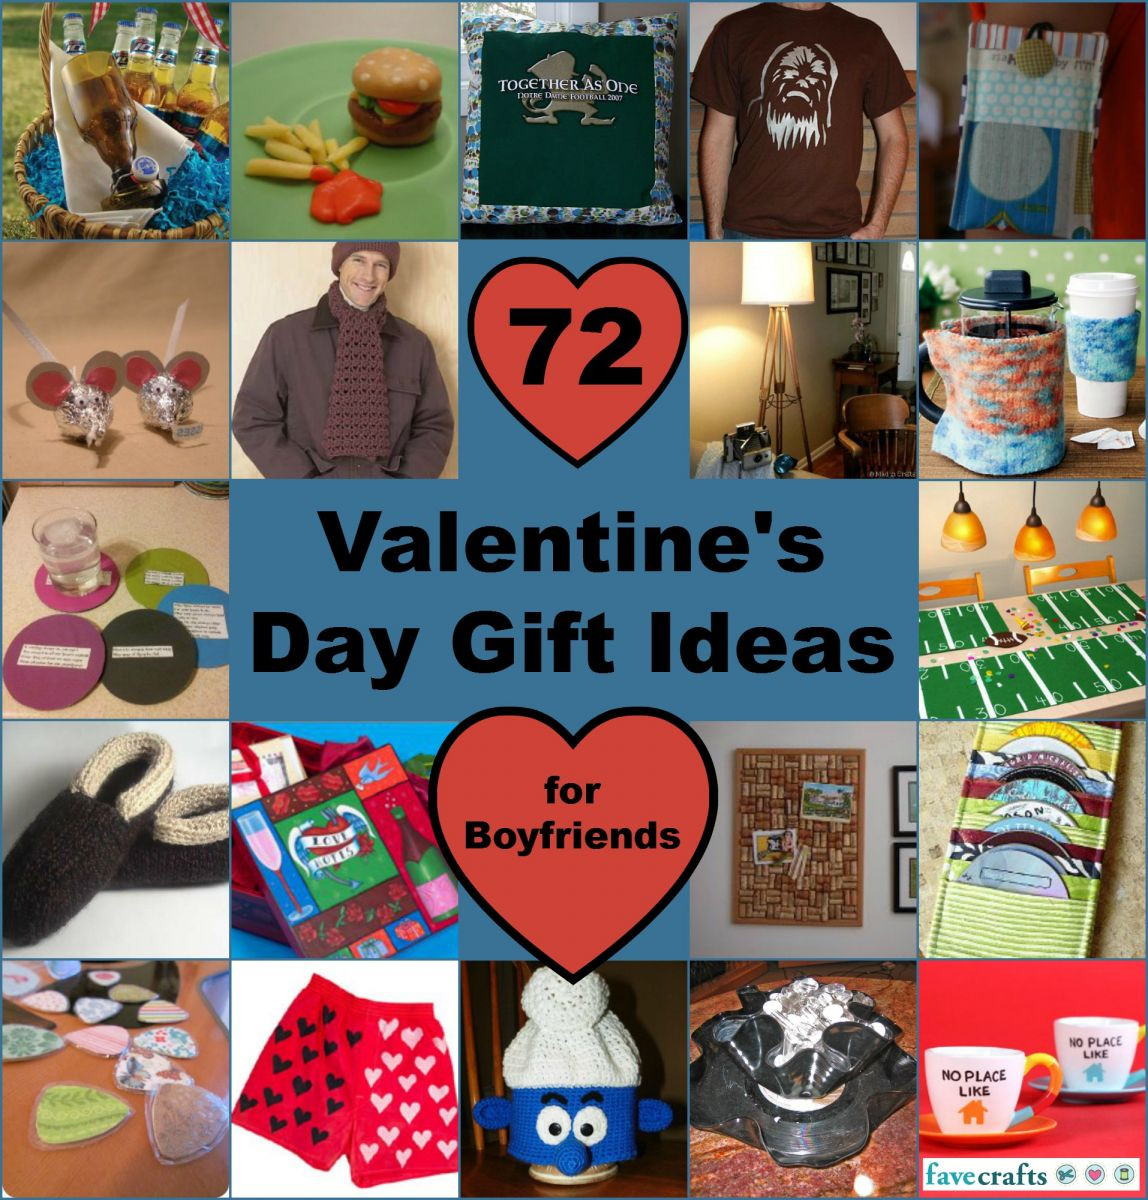 Valentines Gift Ideas For Boyfriend Yahoo
 Top 15 Favorite Valentine s Arts and Crafts Videos and